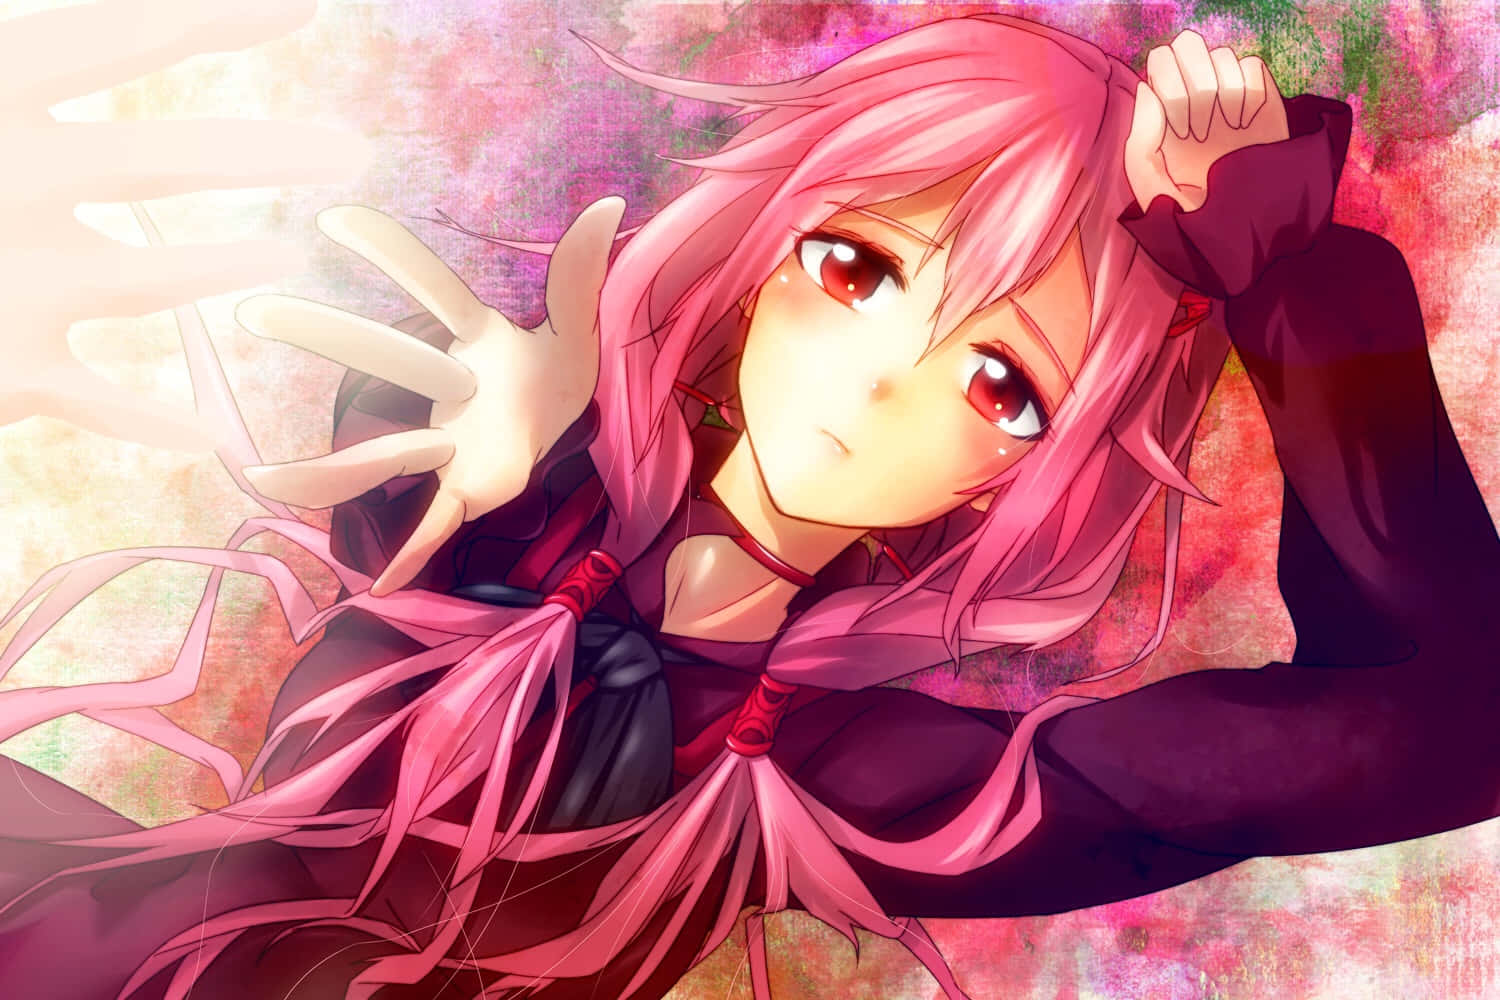 Uncover the truth of the future with Guilty Crown